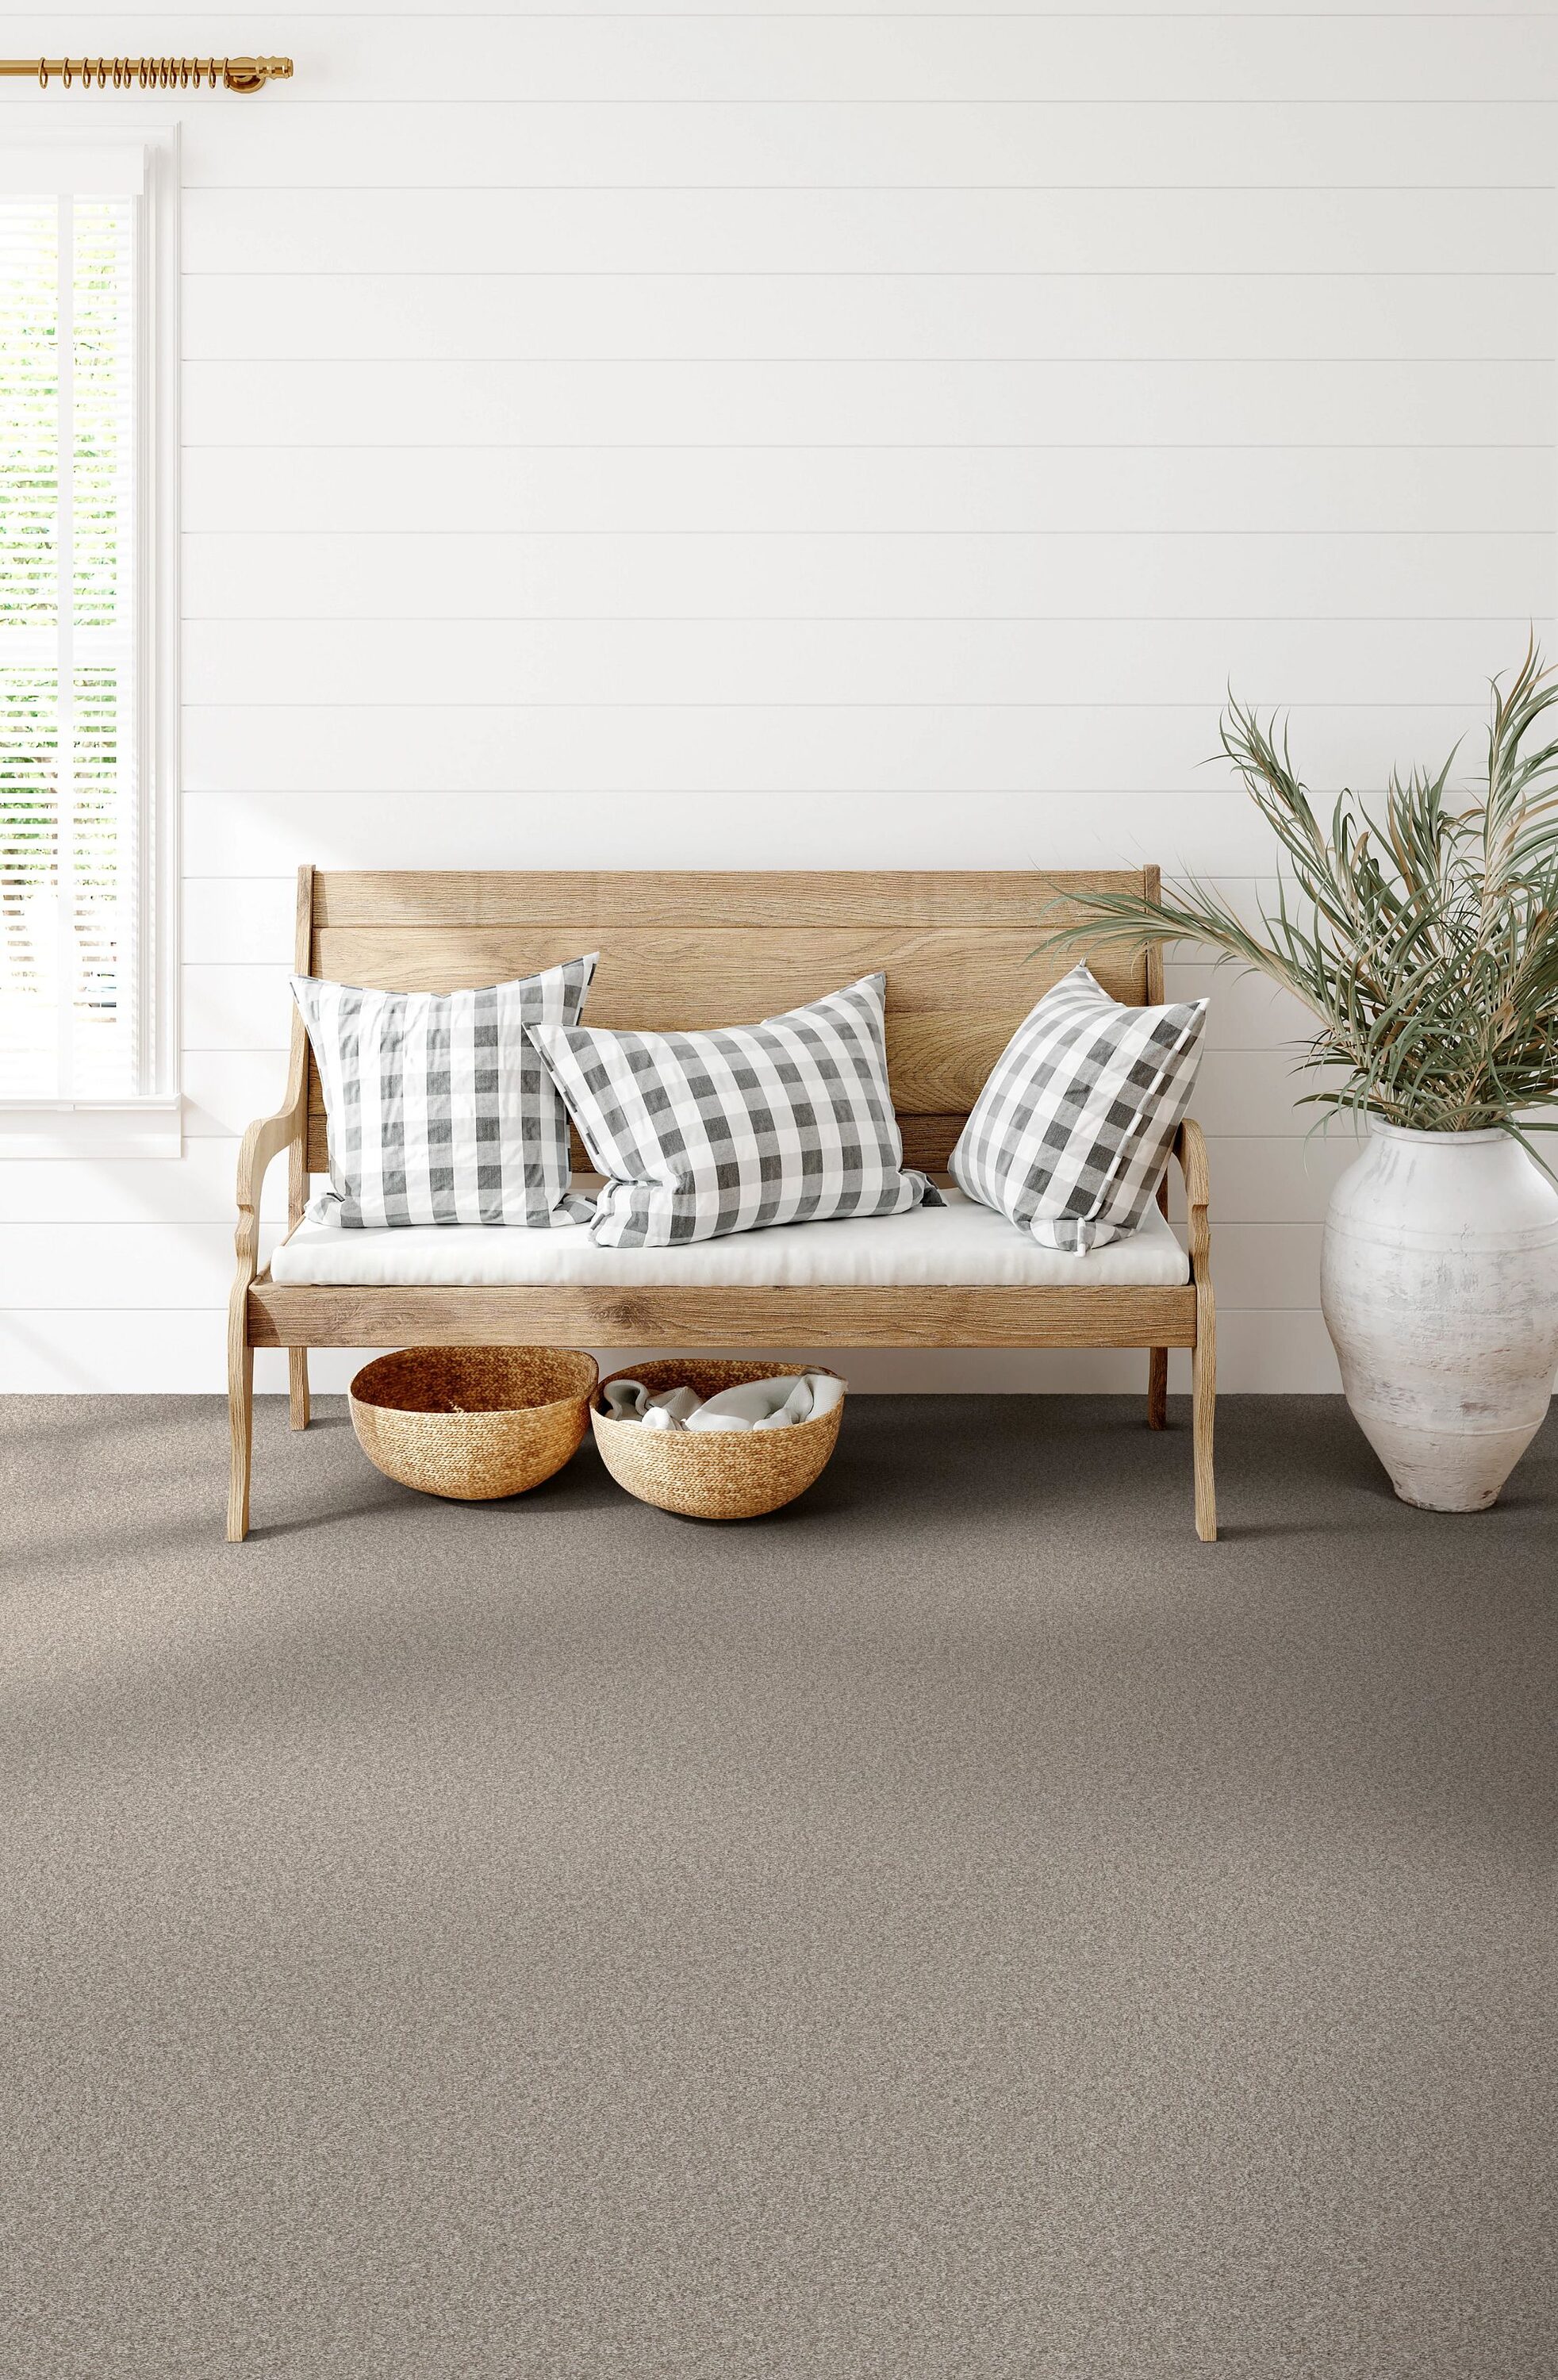 STAINMASTER Effortless Appeal Carpet at in Chic department Carpet Greige the III Textured Indoor